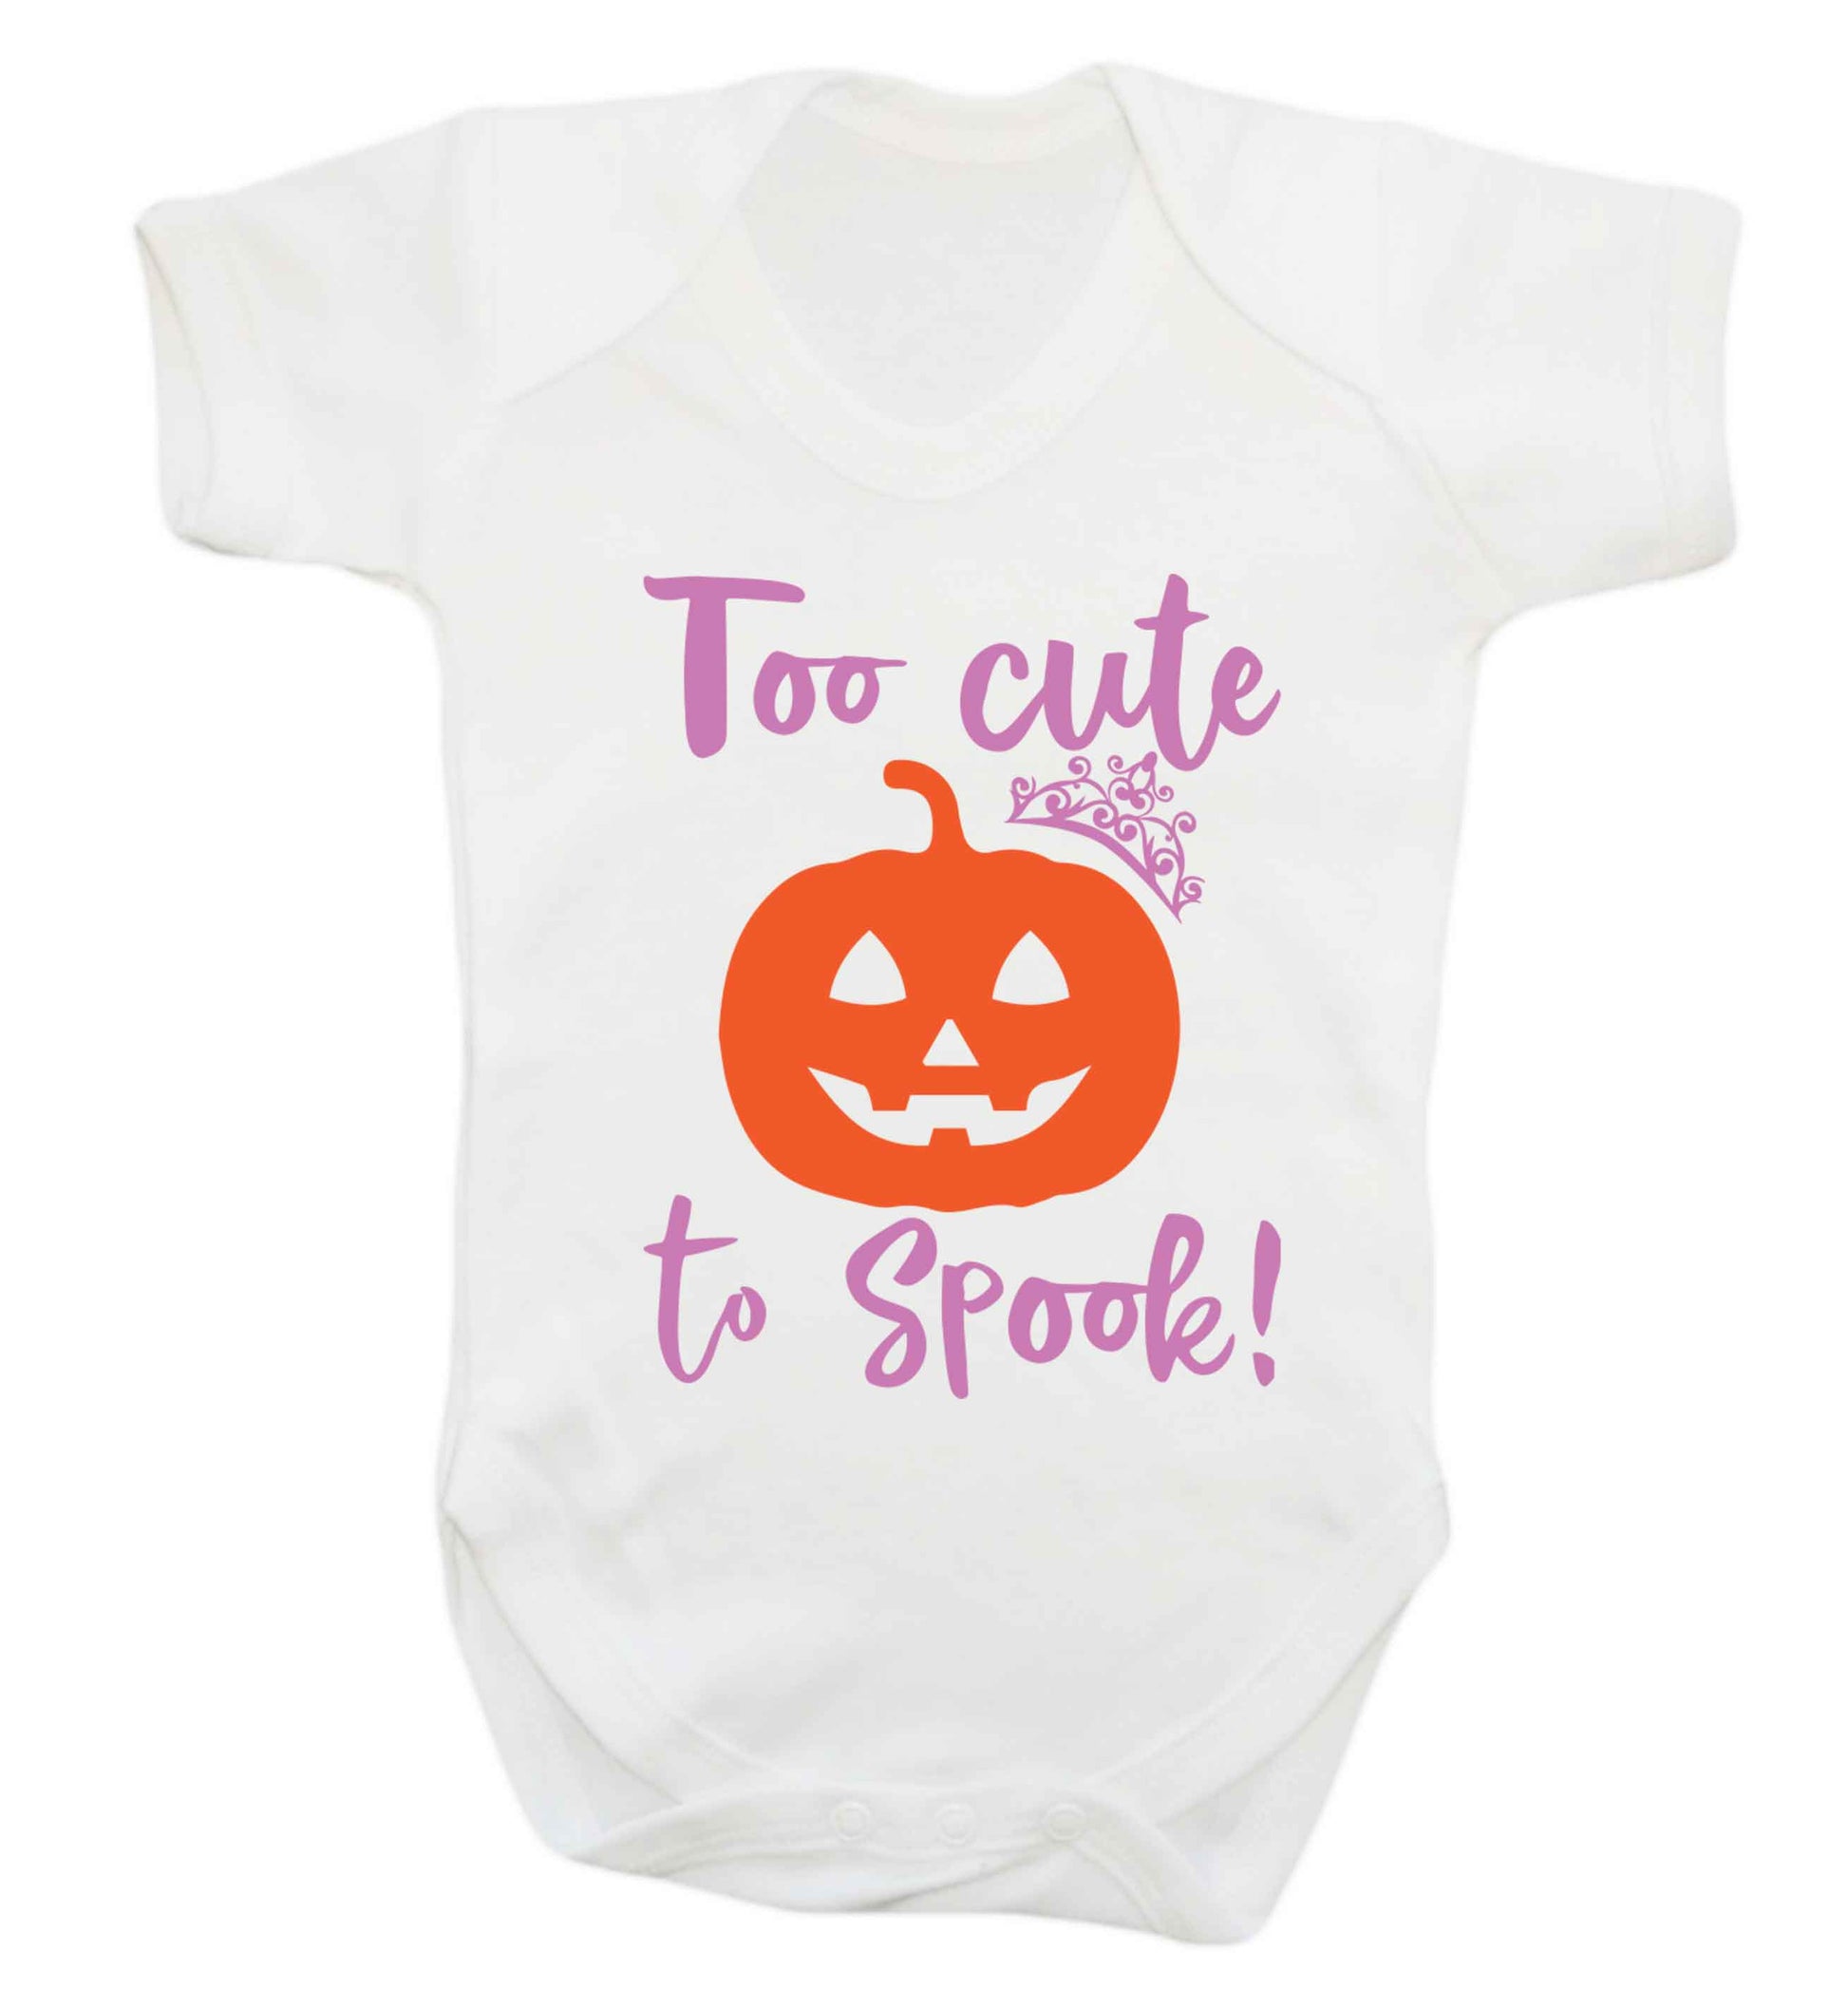 Too cute to spook! Baby Vest white 18-24 months